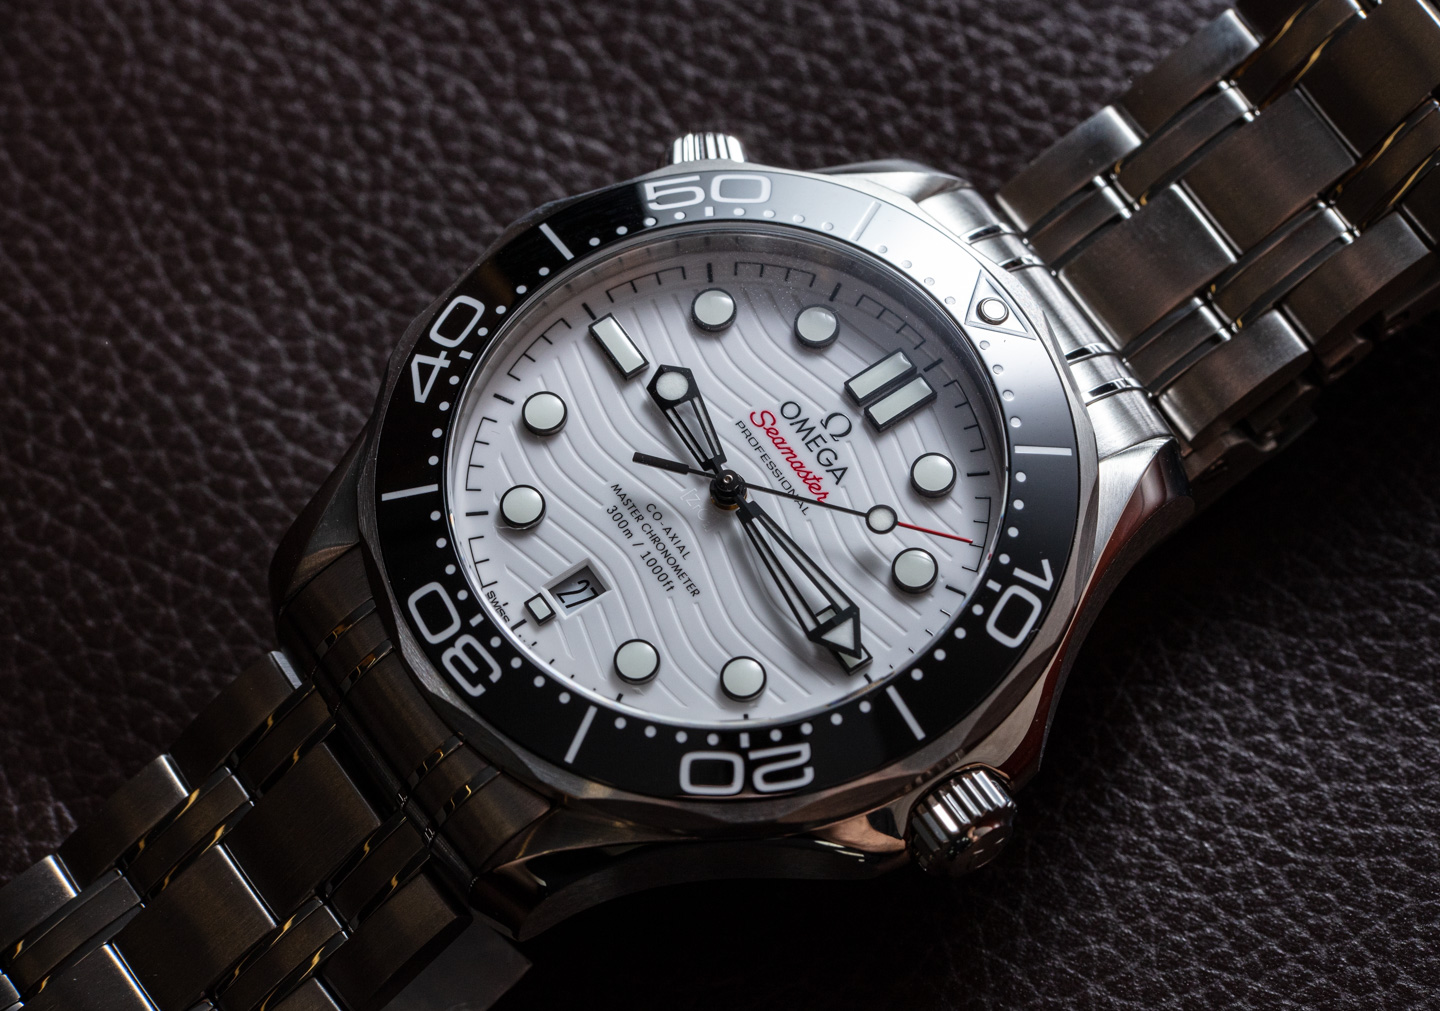 The Omega Seamaster 300M Perfects The White-Dial Sports Watch